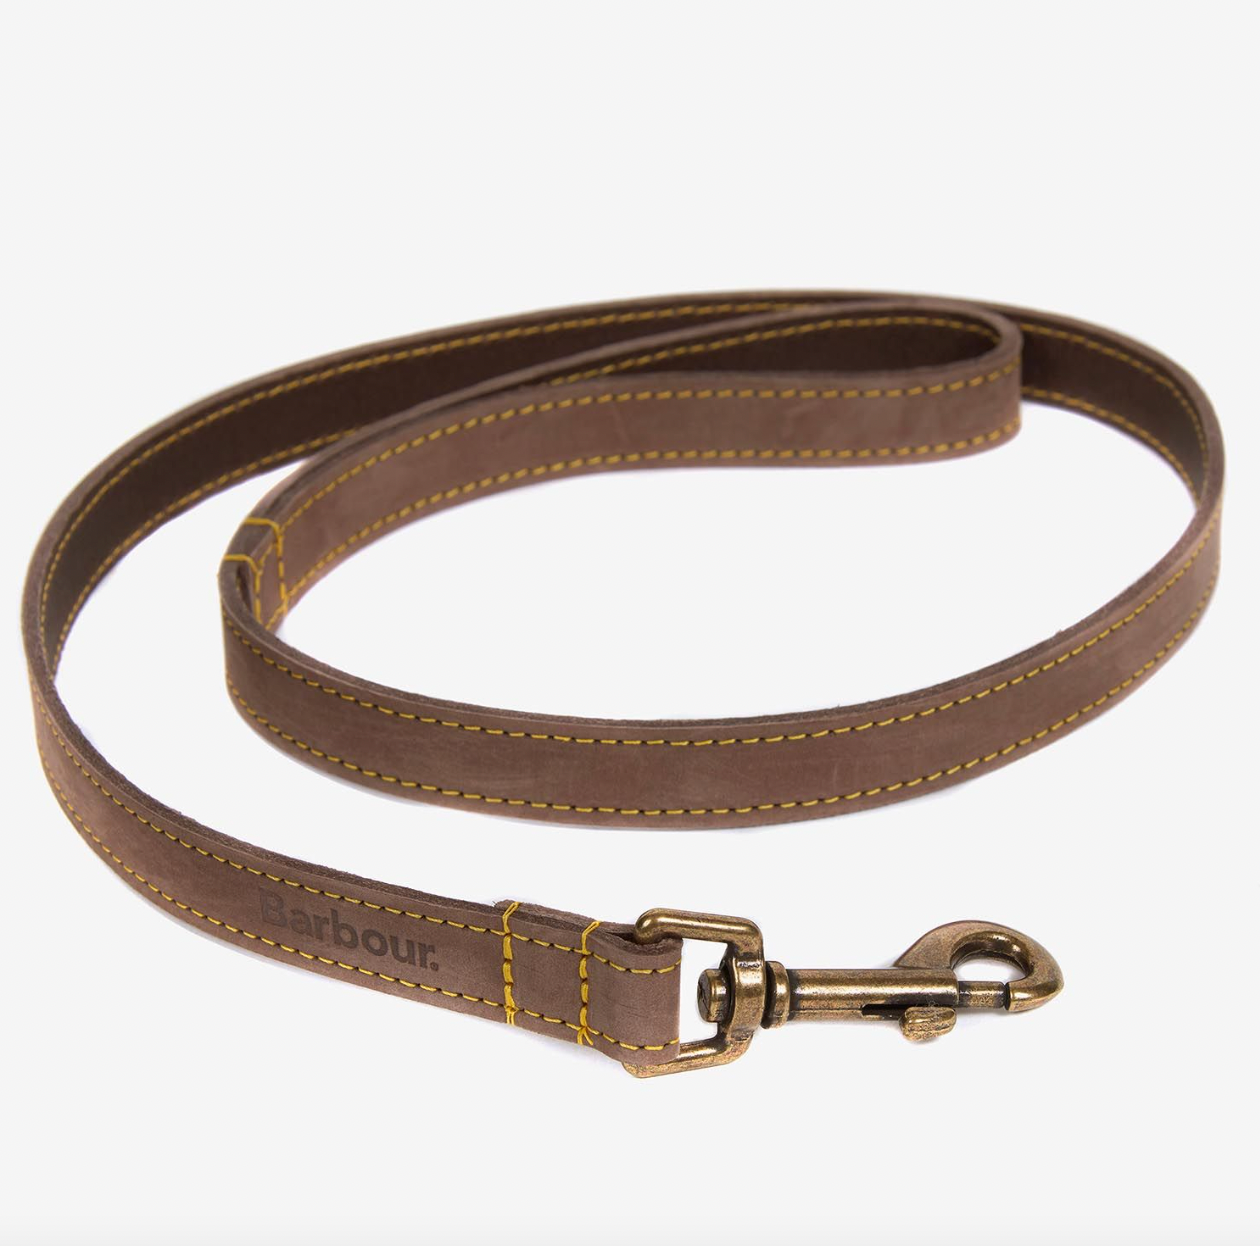 Barbour Leather Dog Leash